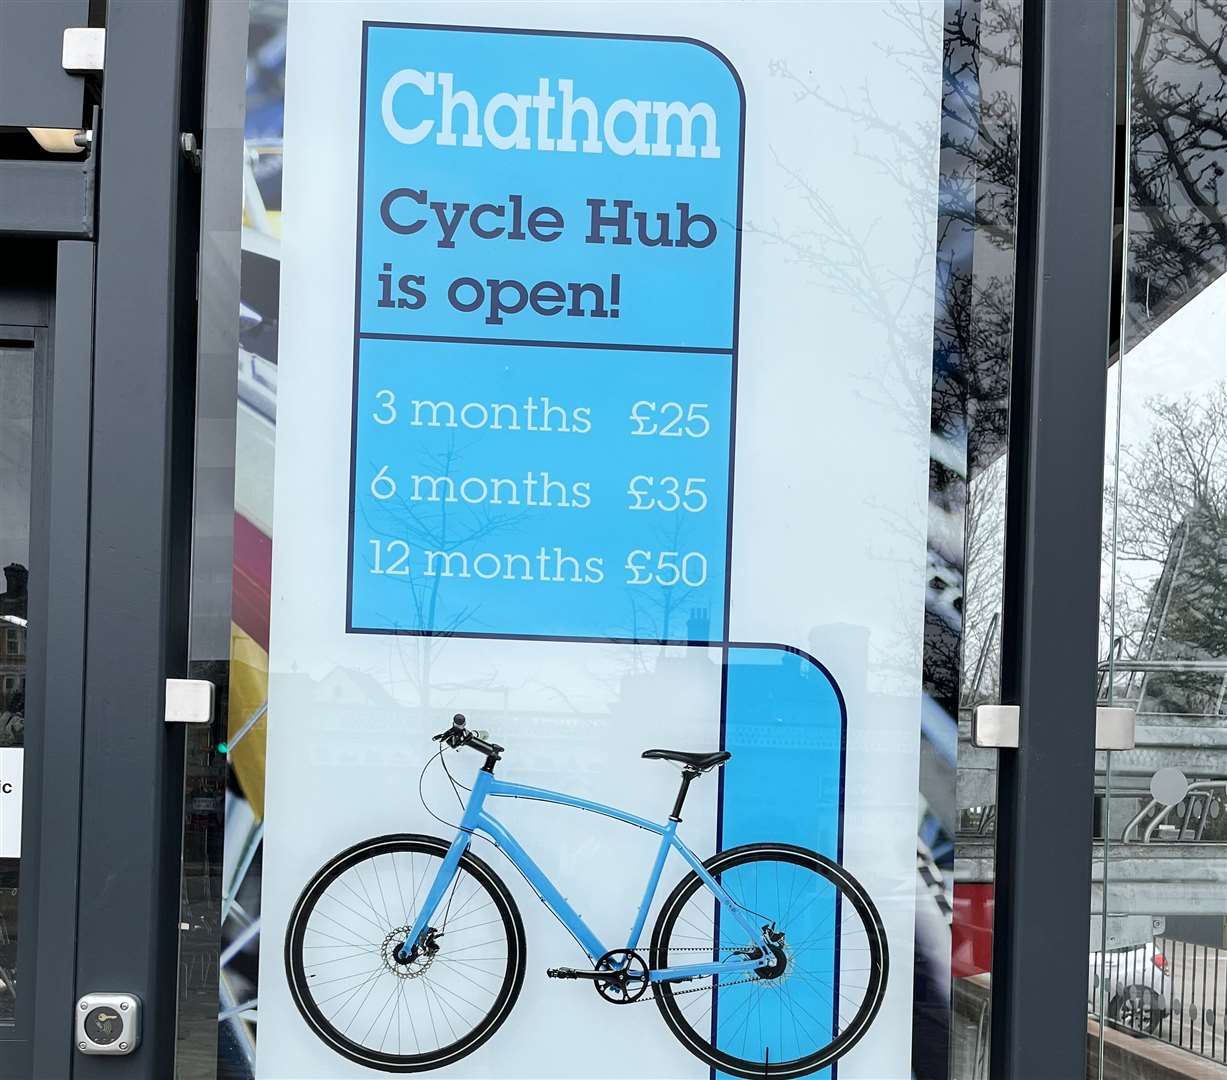 The prices for the Cycle Hub have raised eyebrows